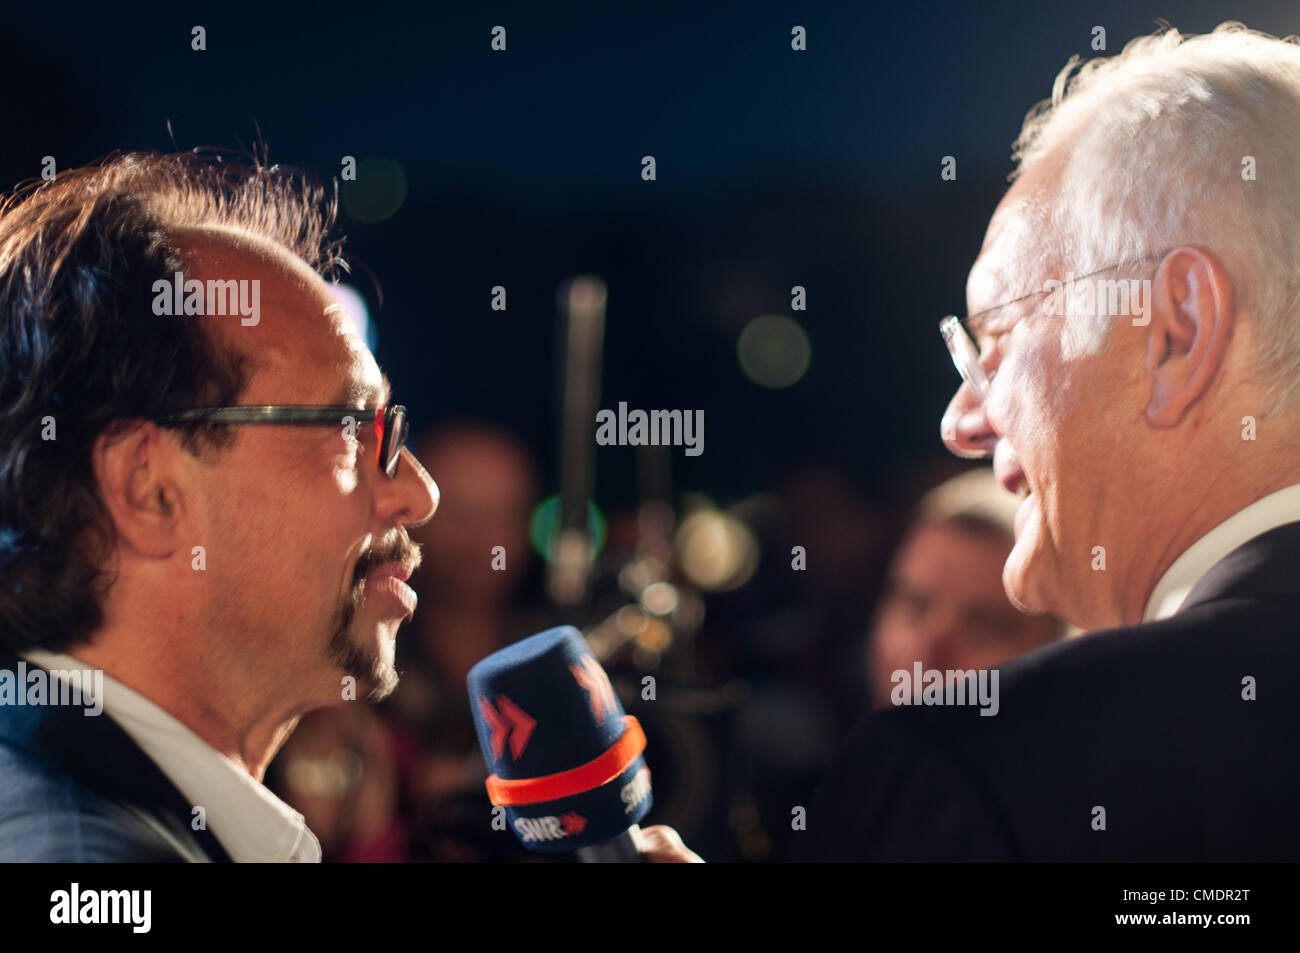 STUTTGART, GERMANY - JULY 25: Harald Schmidt, the most famous German talkmaster, is interviewing comedian Christoph Sonntag as a guest at the public viewing of the premiere of Mozart´s opera “Don Giovanni” in front of the Opera building in Stuttgart, Germany on July 25, 2012. Stock Photo